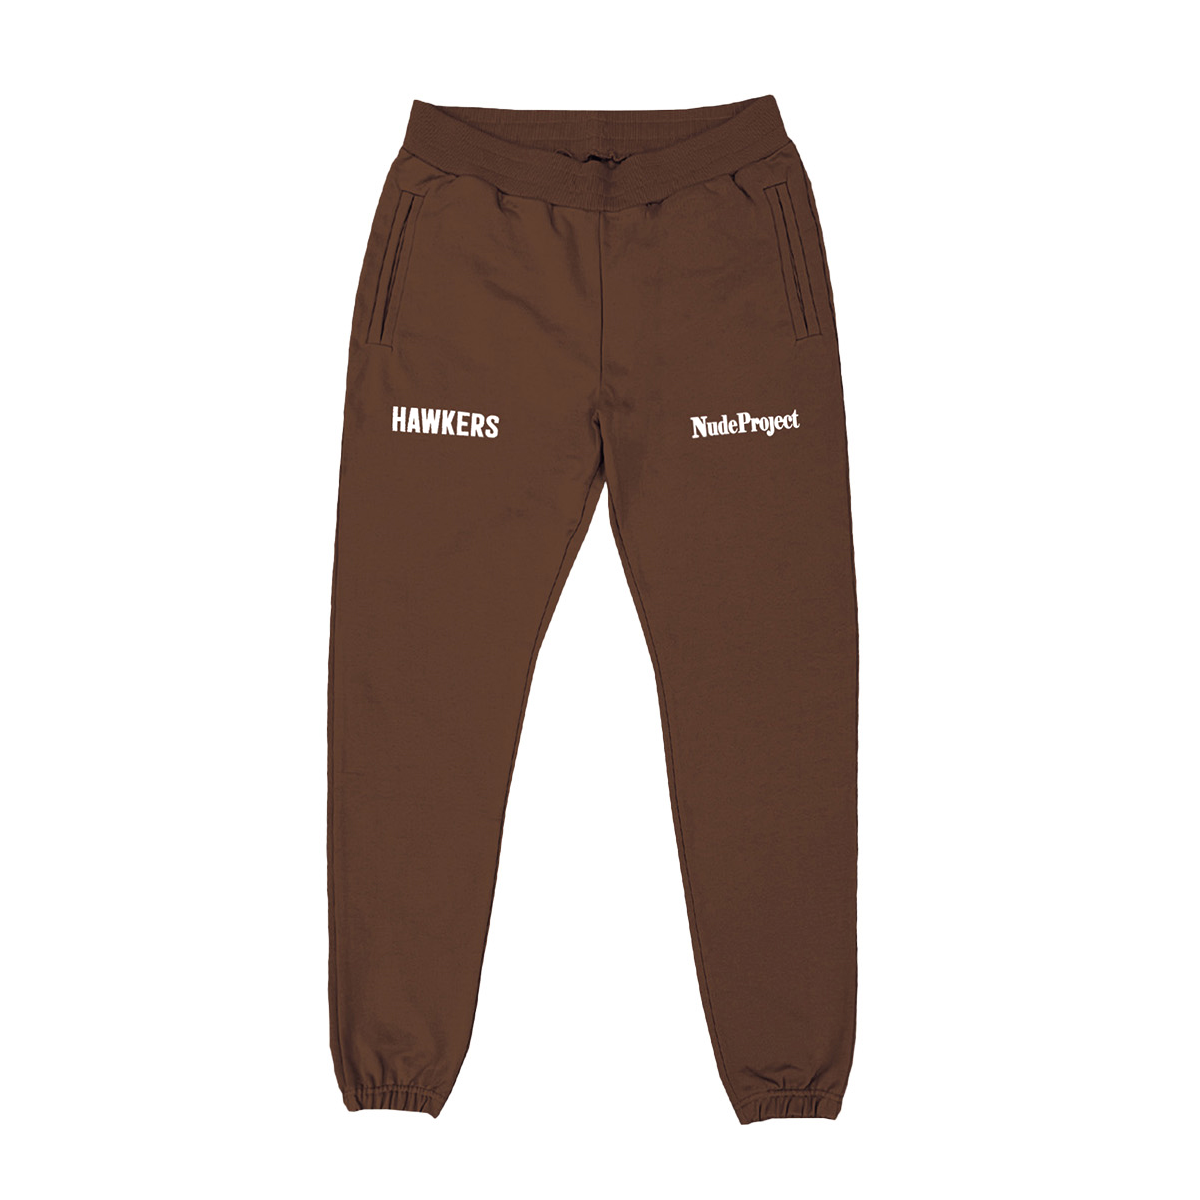 Hawkers X Nude - Motto Sweatpants (xl)